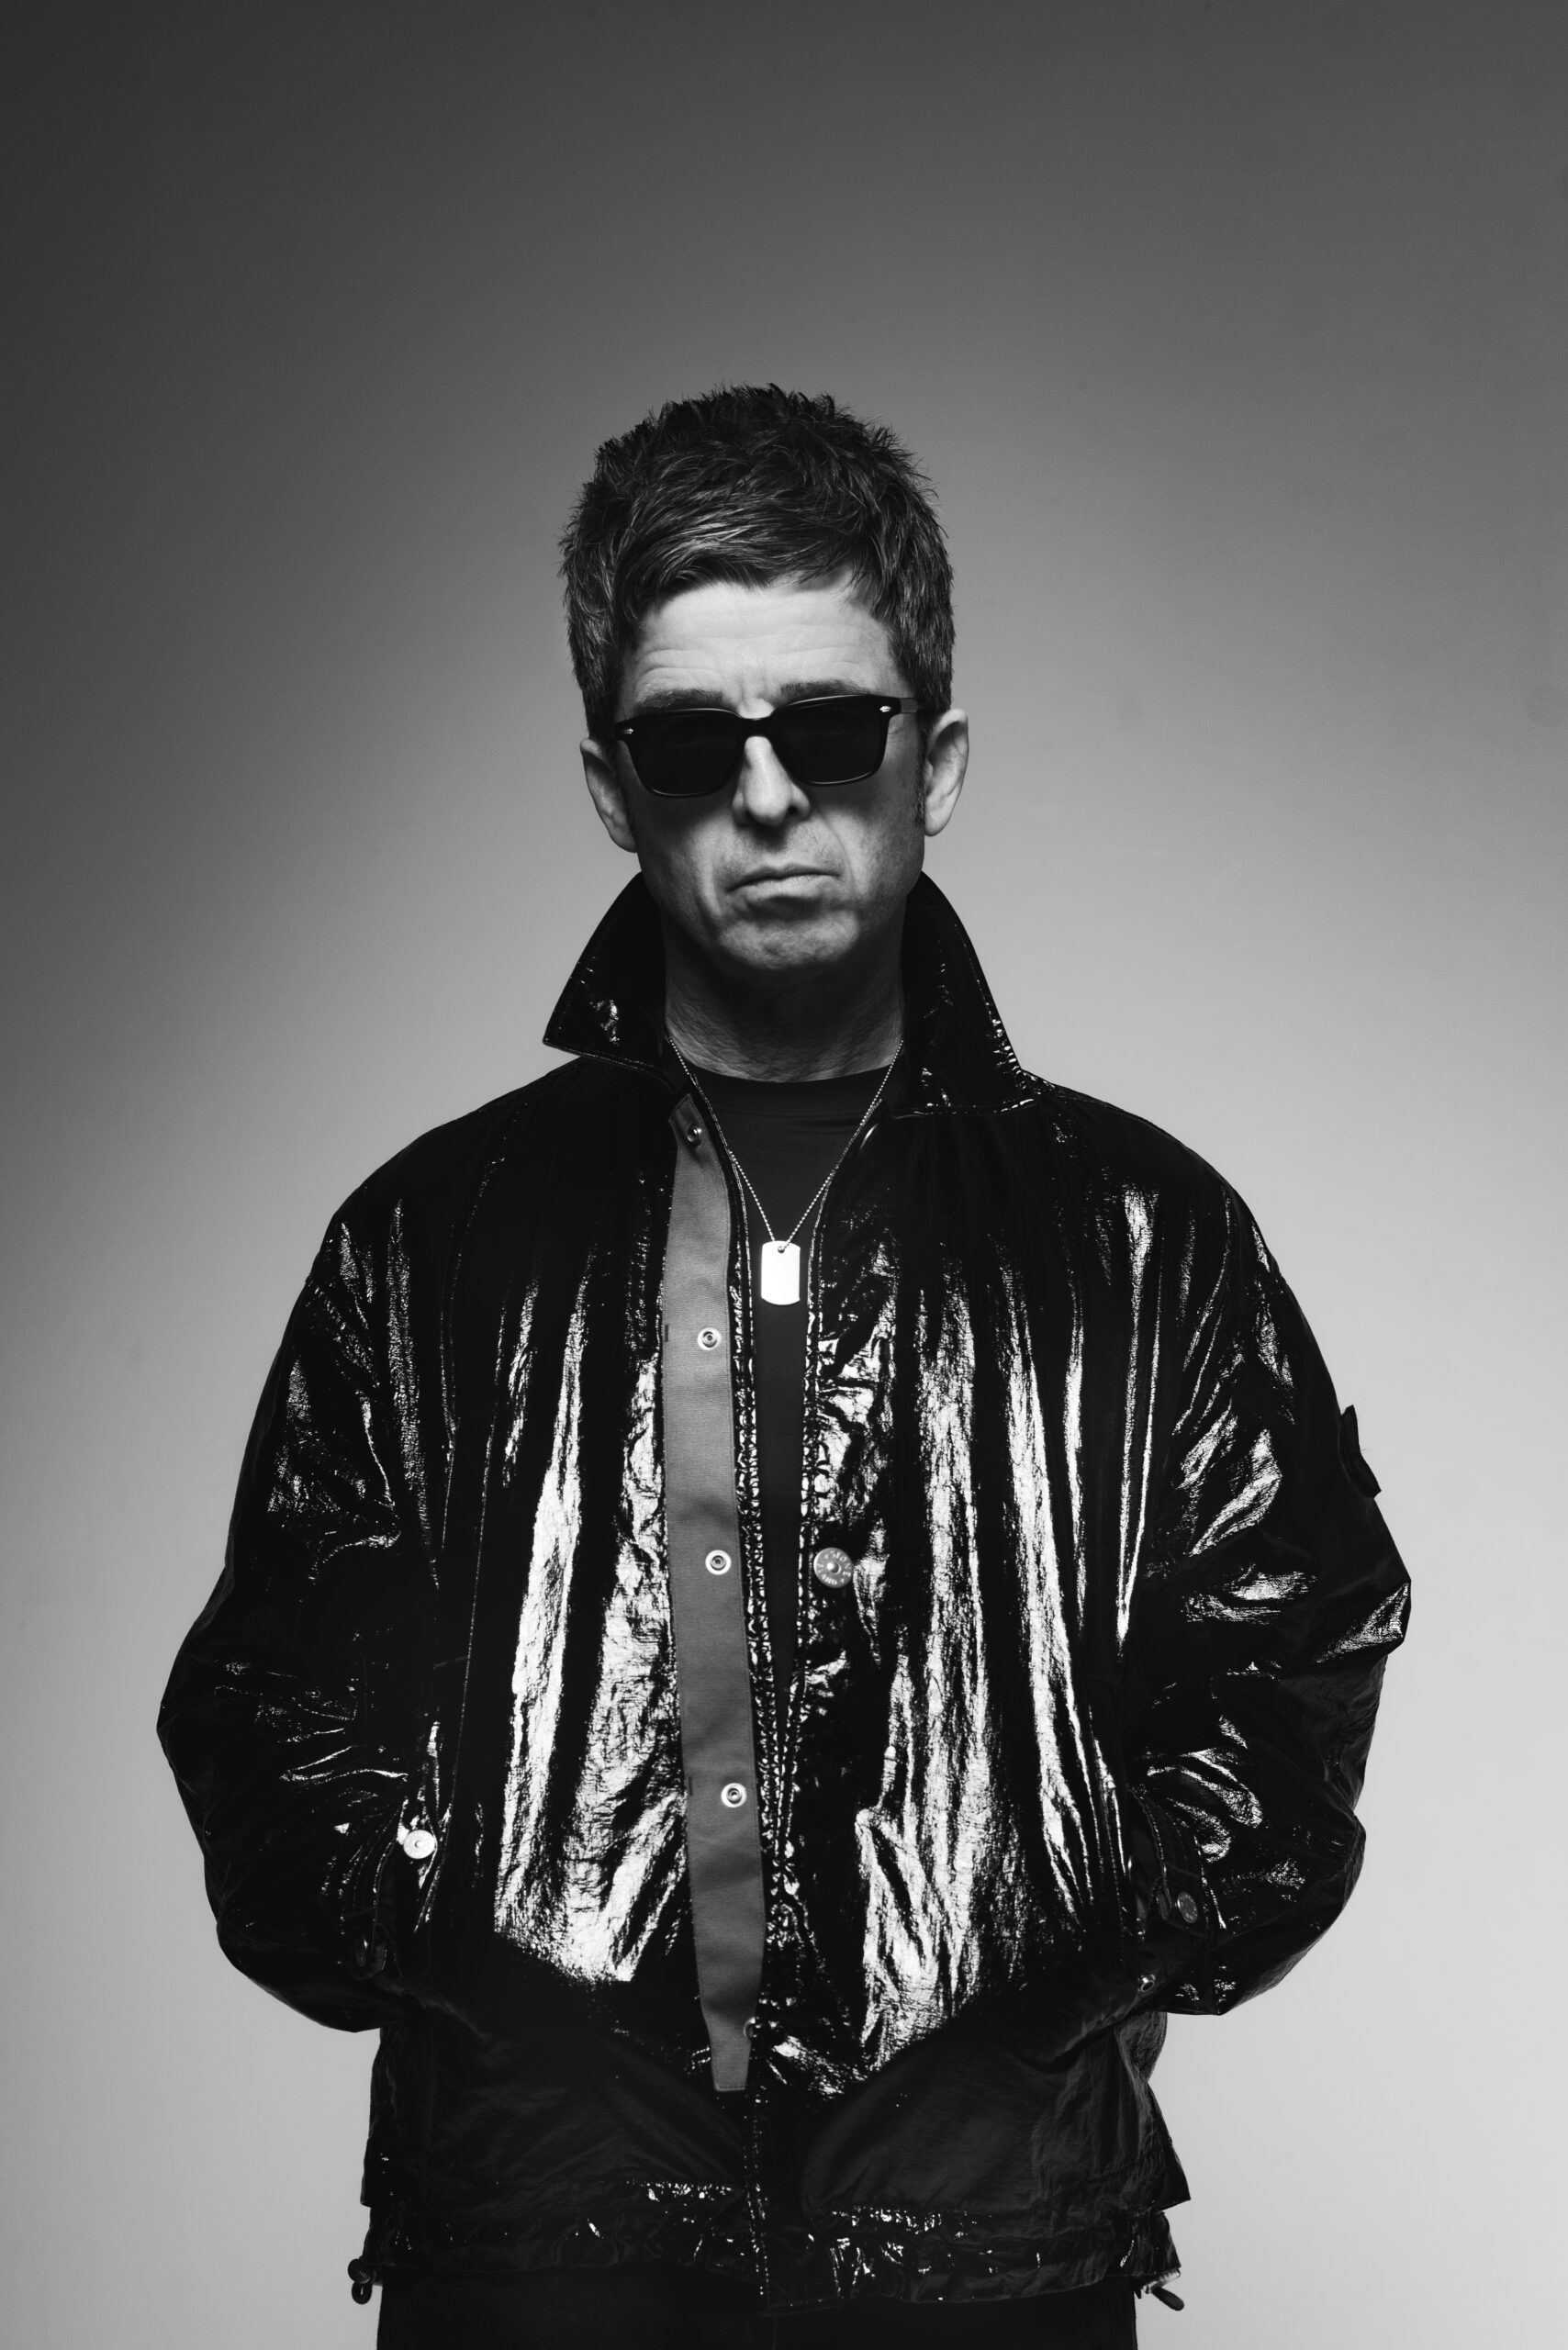 NOEL GALLAGHER’S HIGH FLYING BIRDS ANNOUNCE NEW ALBUM – COUNCIL SKIES – OUT JUNE 2